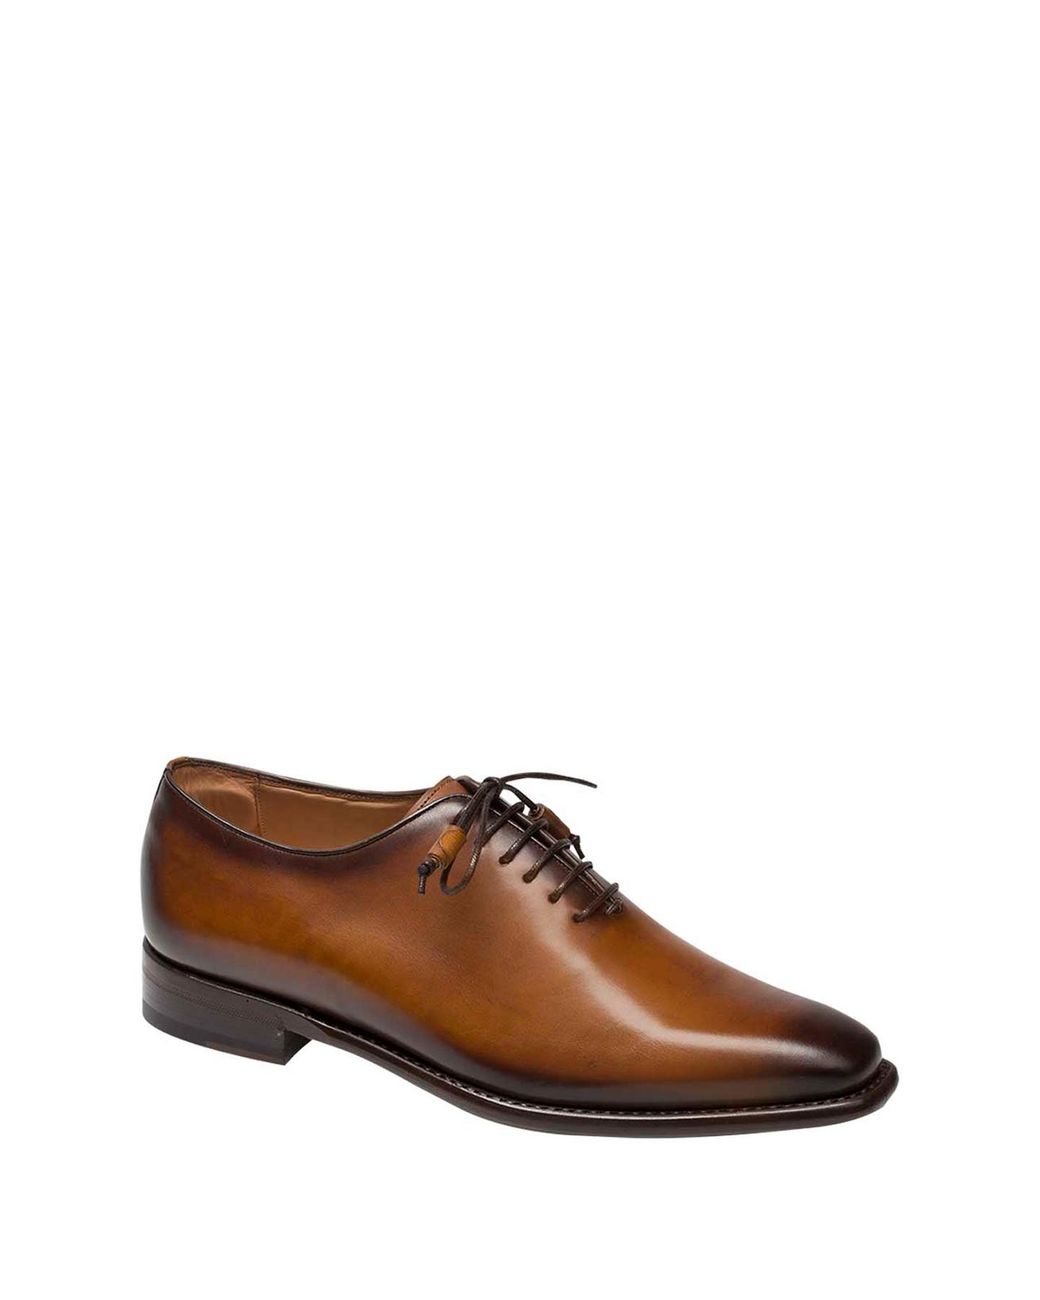 Mezlan 'Andres' Lace Up Oxford Cognac Brown Leather Mens Size 9 M MSRP $285 Details about   New